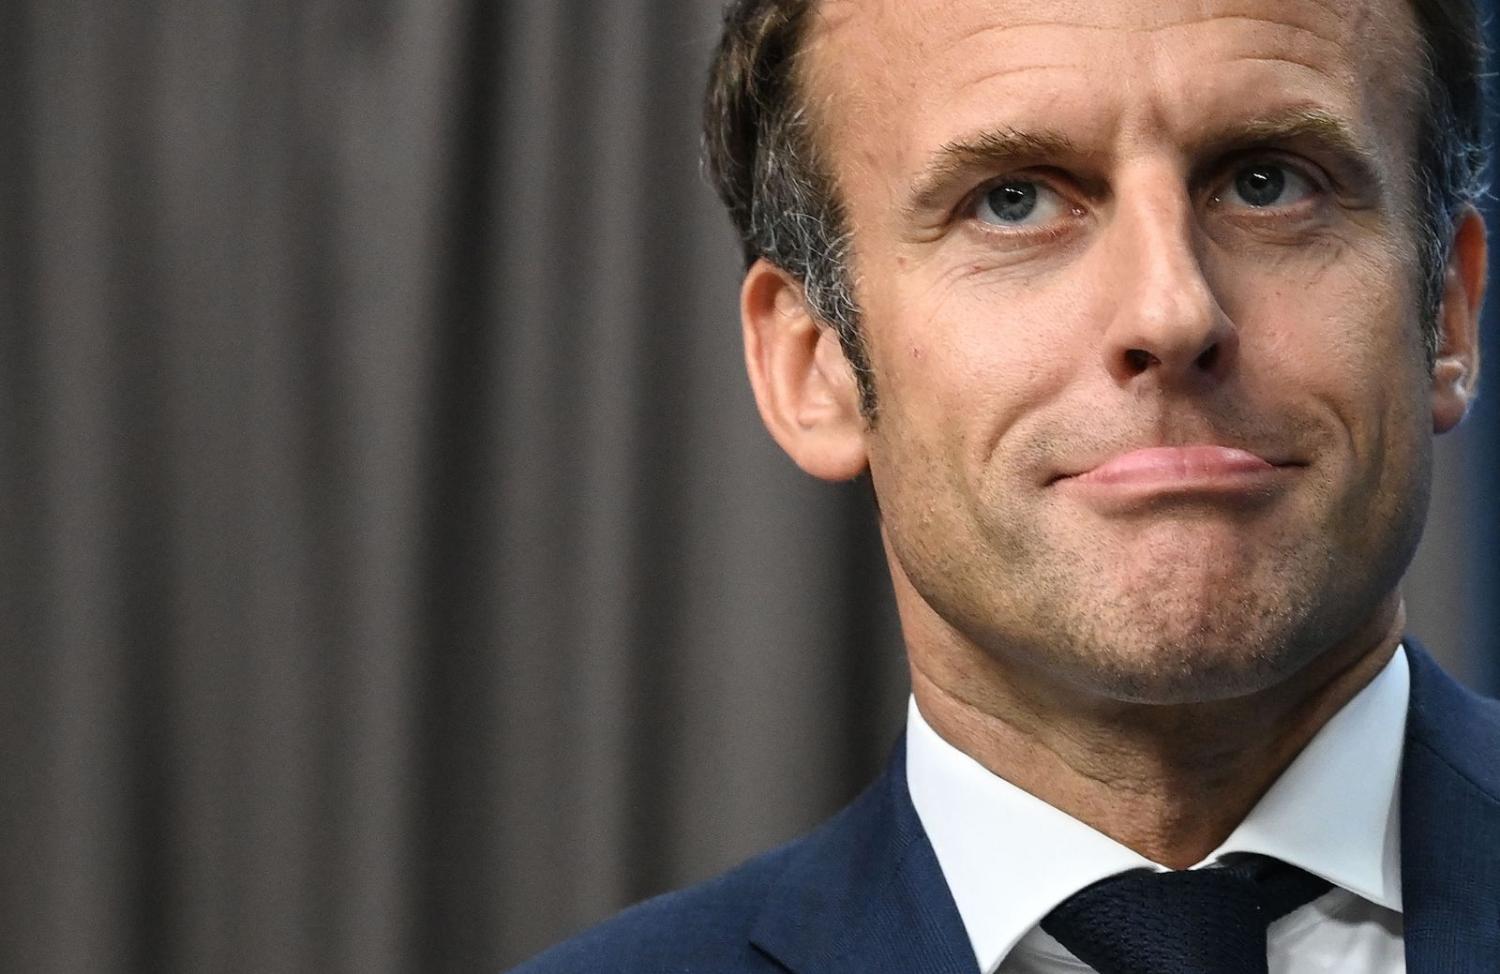 Around eight in 10 Australians trust France to act responsibly in the world, a number which has not been affected by recent tensions (John Thys/AFP via Getty Images)